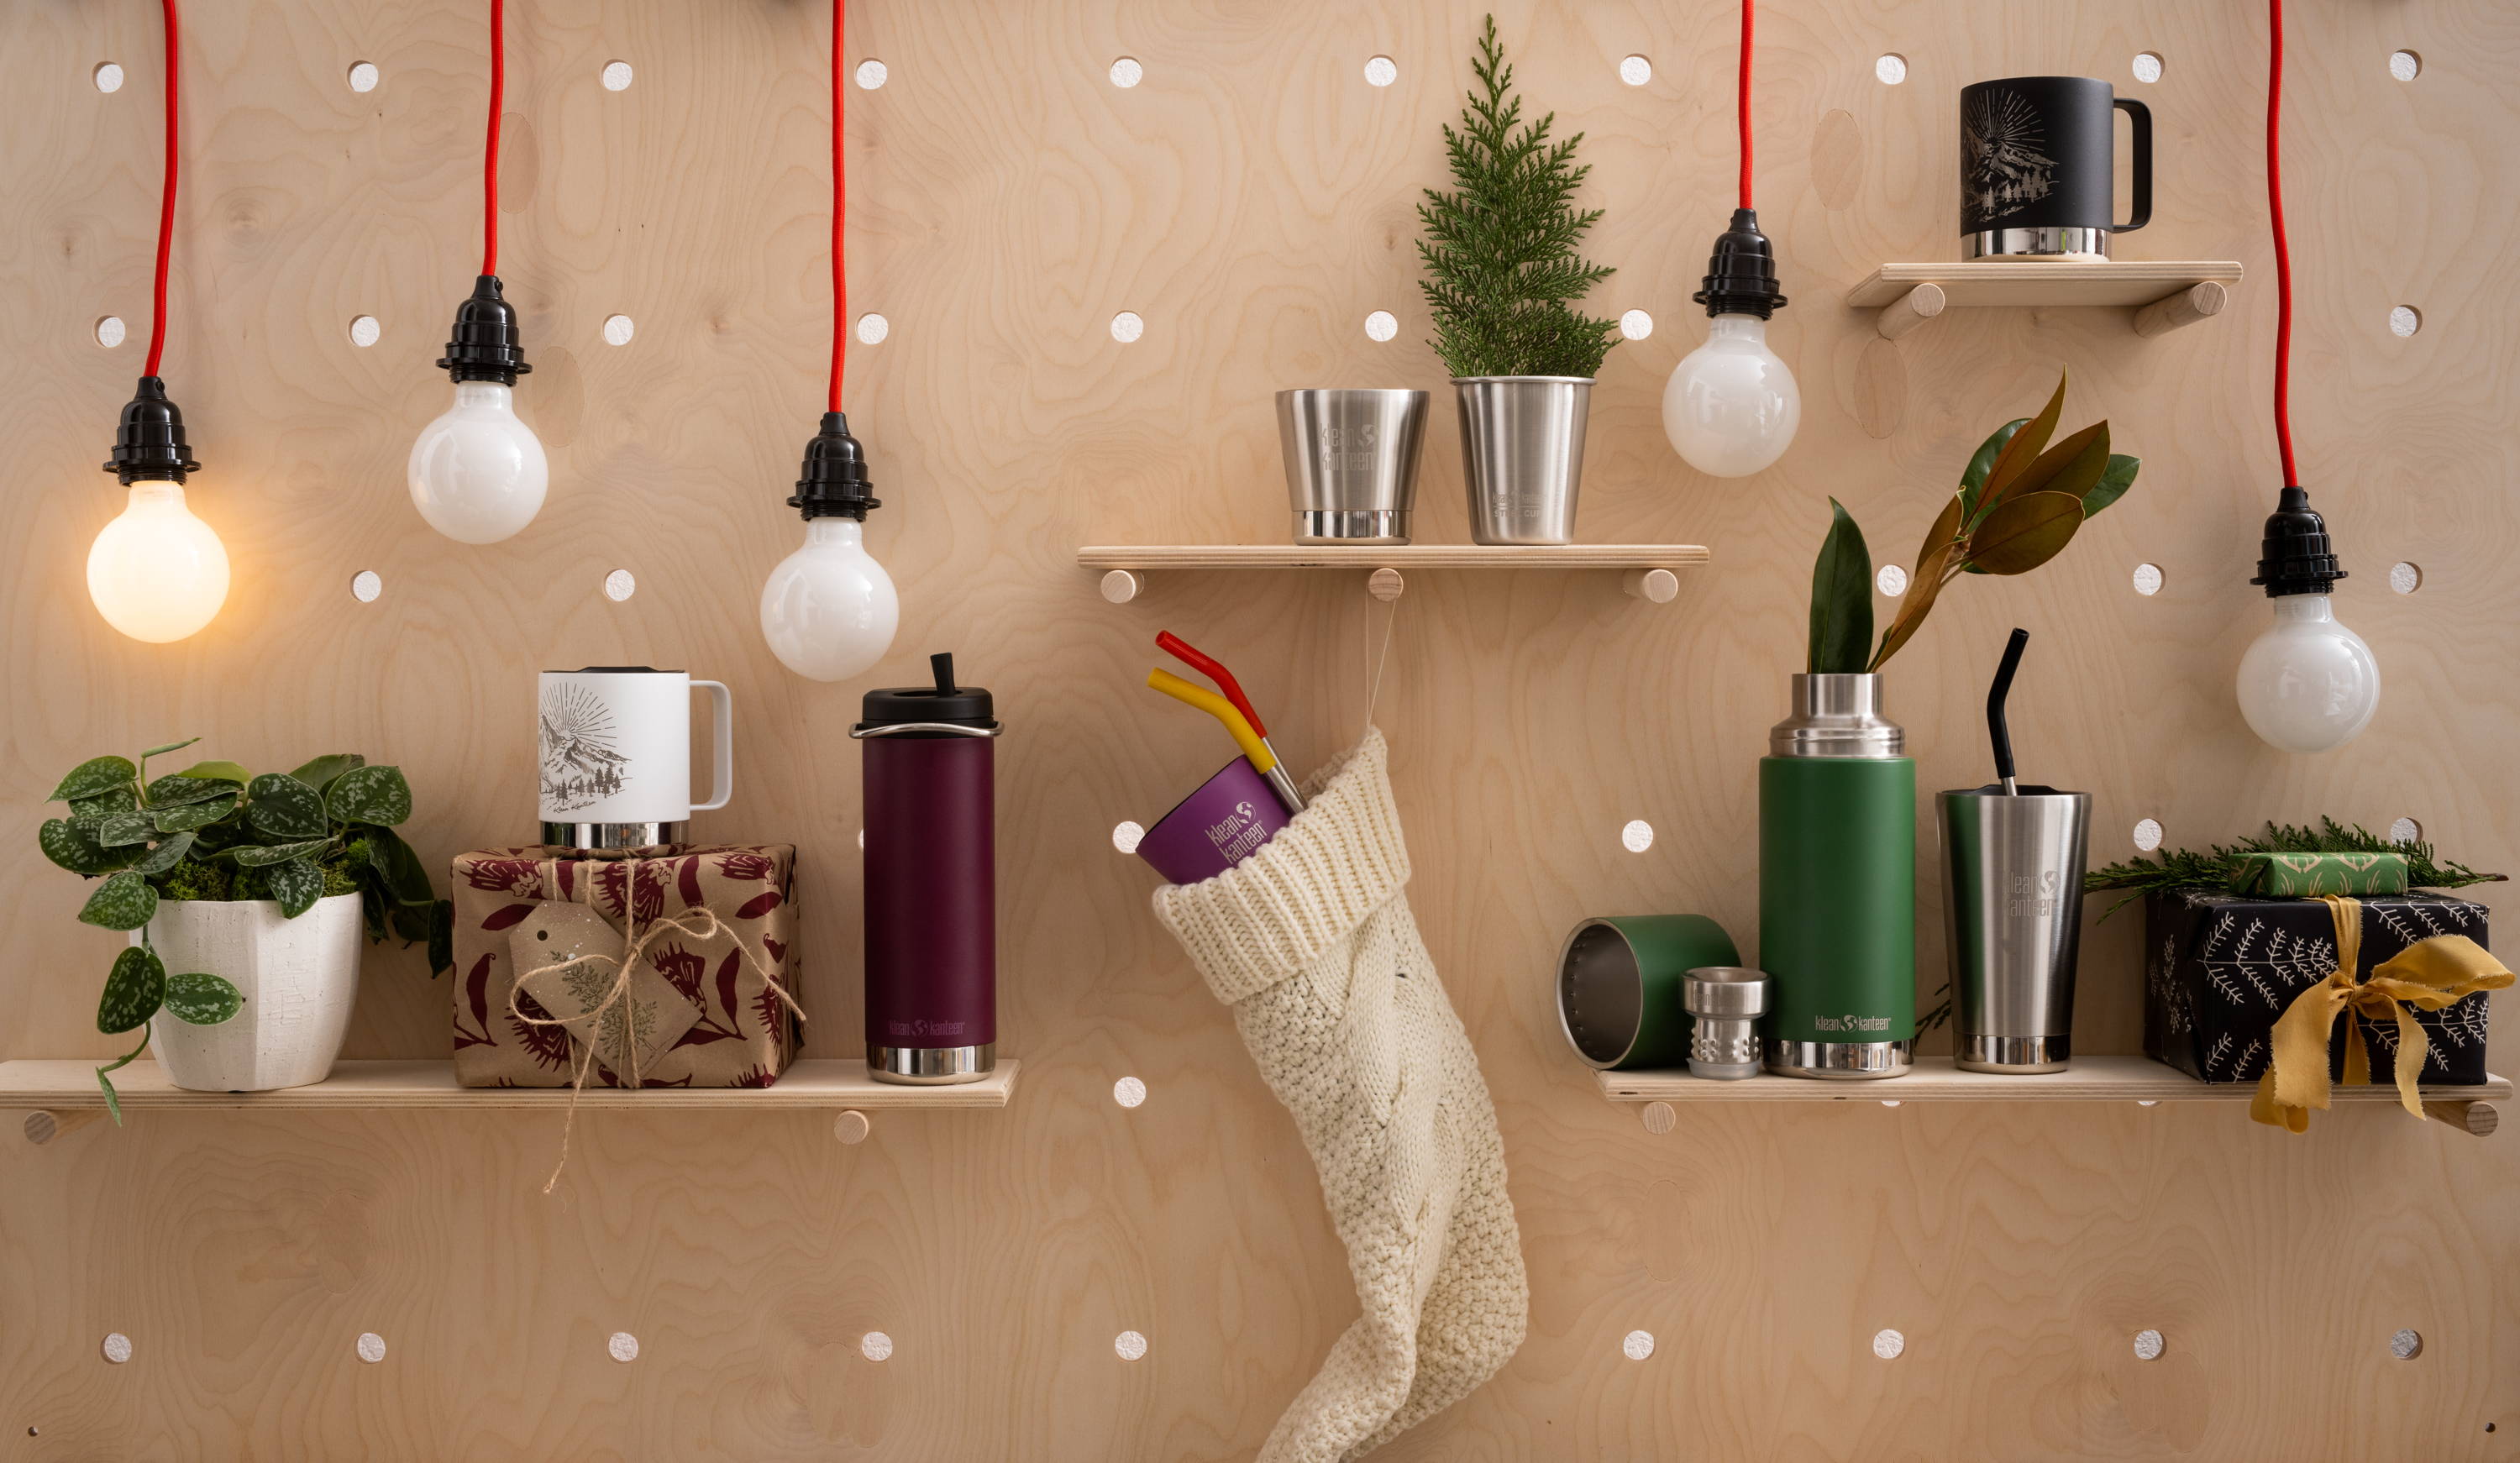 Klean Kanteen peg board display with stocking and several Klean Kanteen products